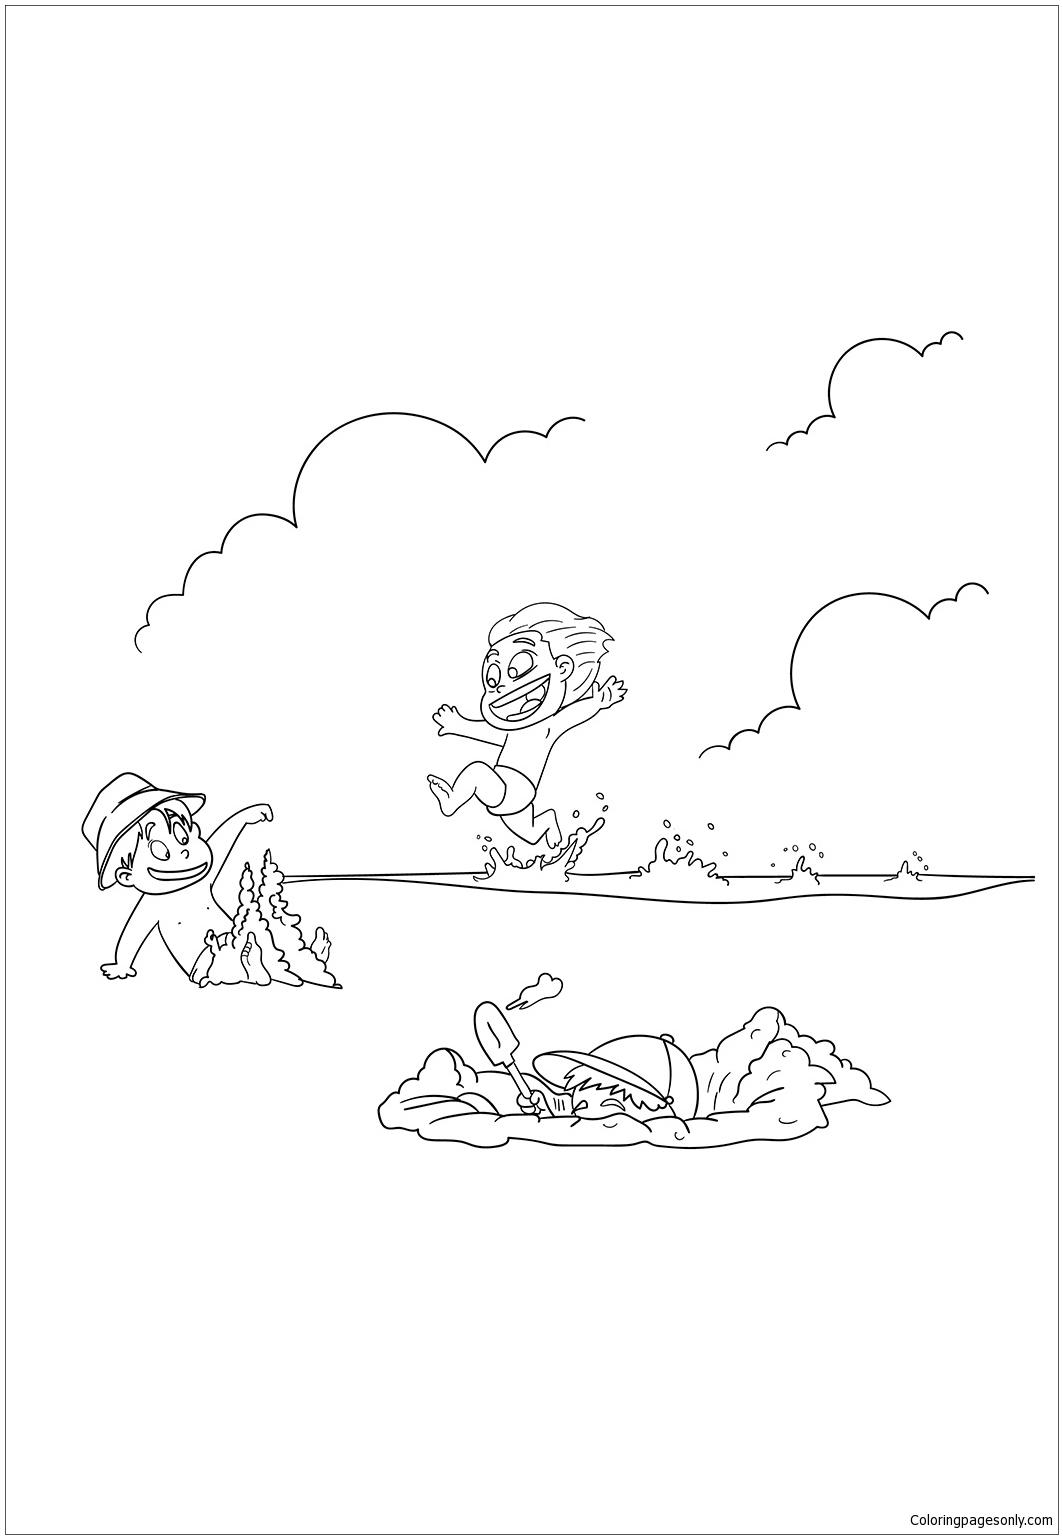 Children In Summer Coloring Page